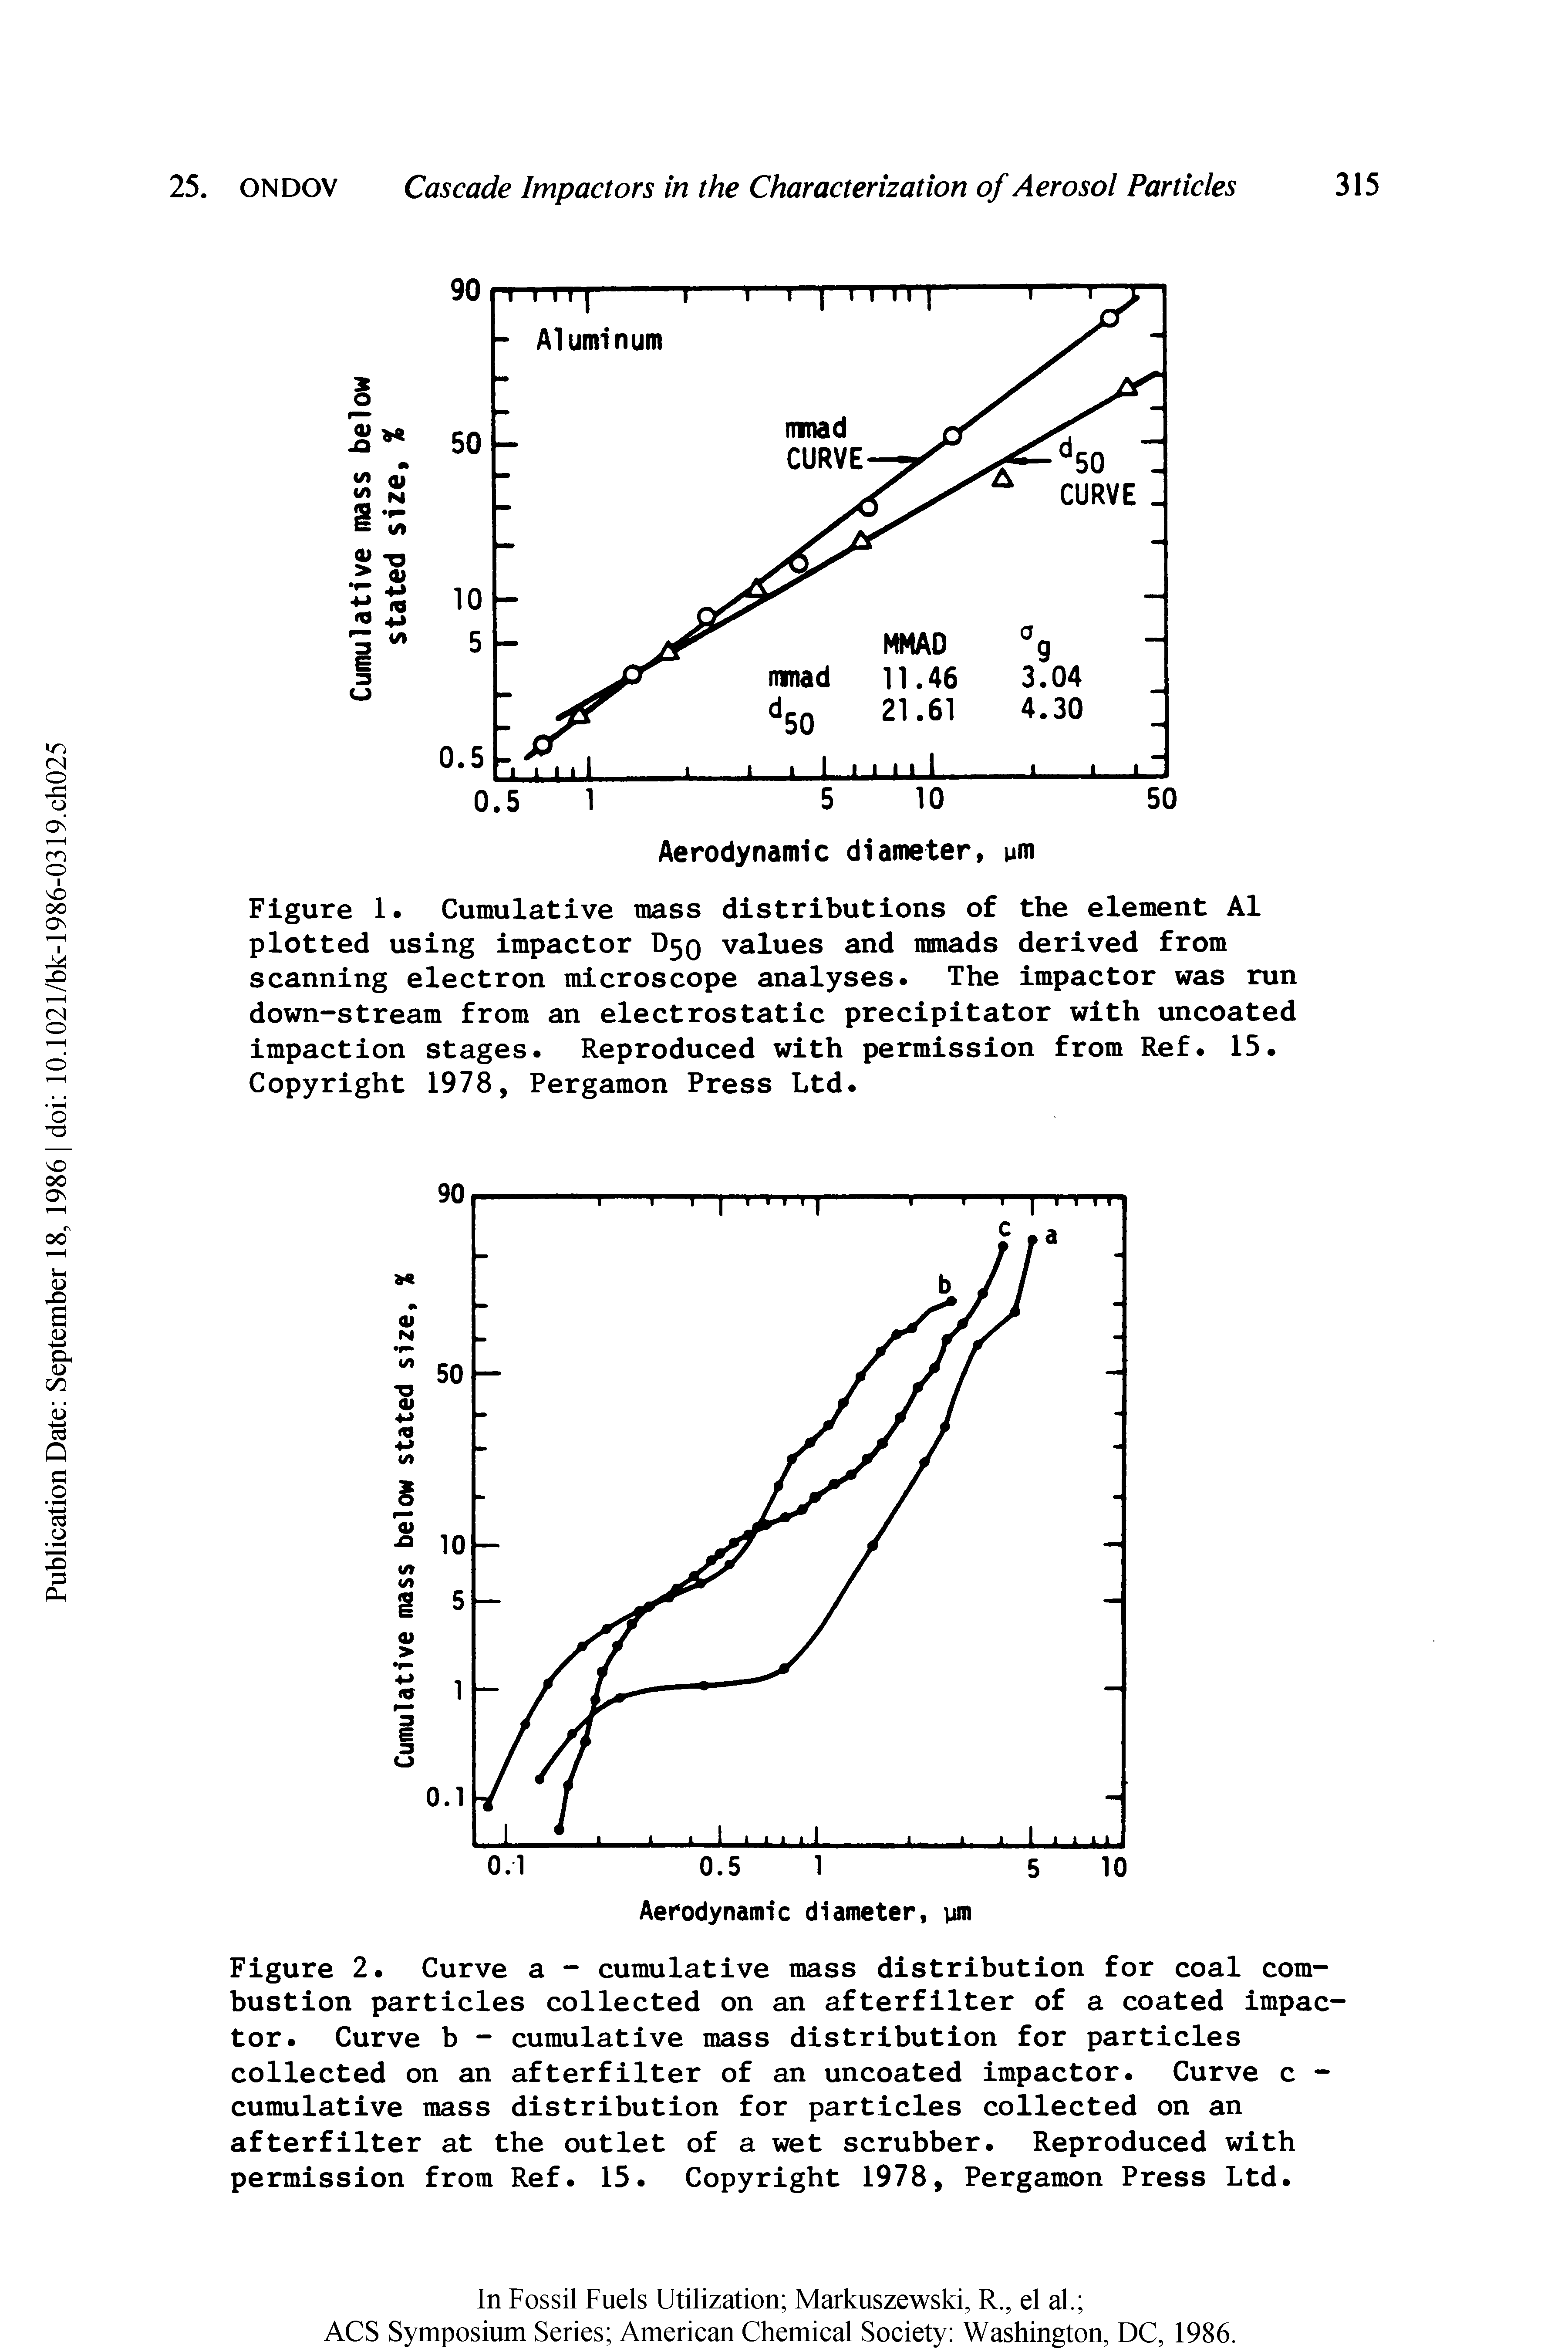 Figure 1. Cumulative mass distributions of the element A1 plotted using impactor D50 values and mmads derived from scanning electron microscope analyses. The impactor was run down-stream from an electrostatic precipitator with uncoated impaction stages. Reproduced with permission from Ref. 15. Copyright 1978, Pergamon Press Ltd.